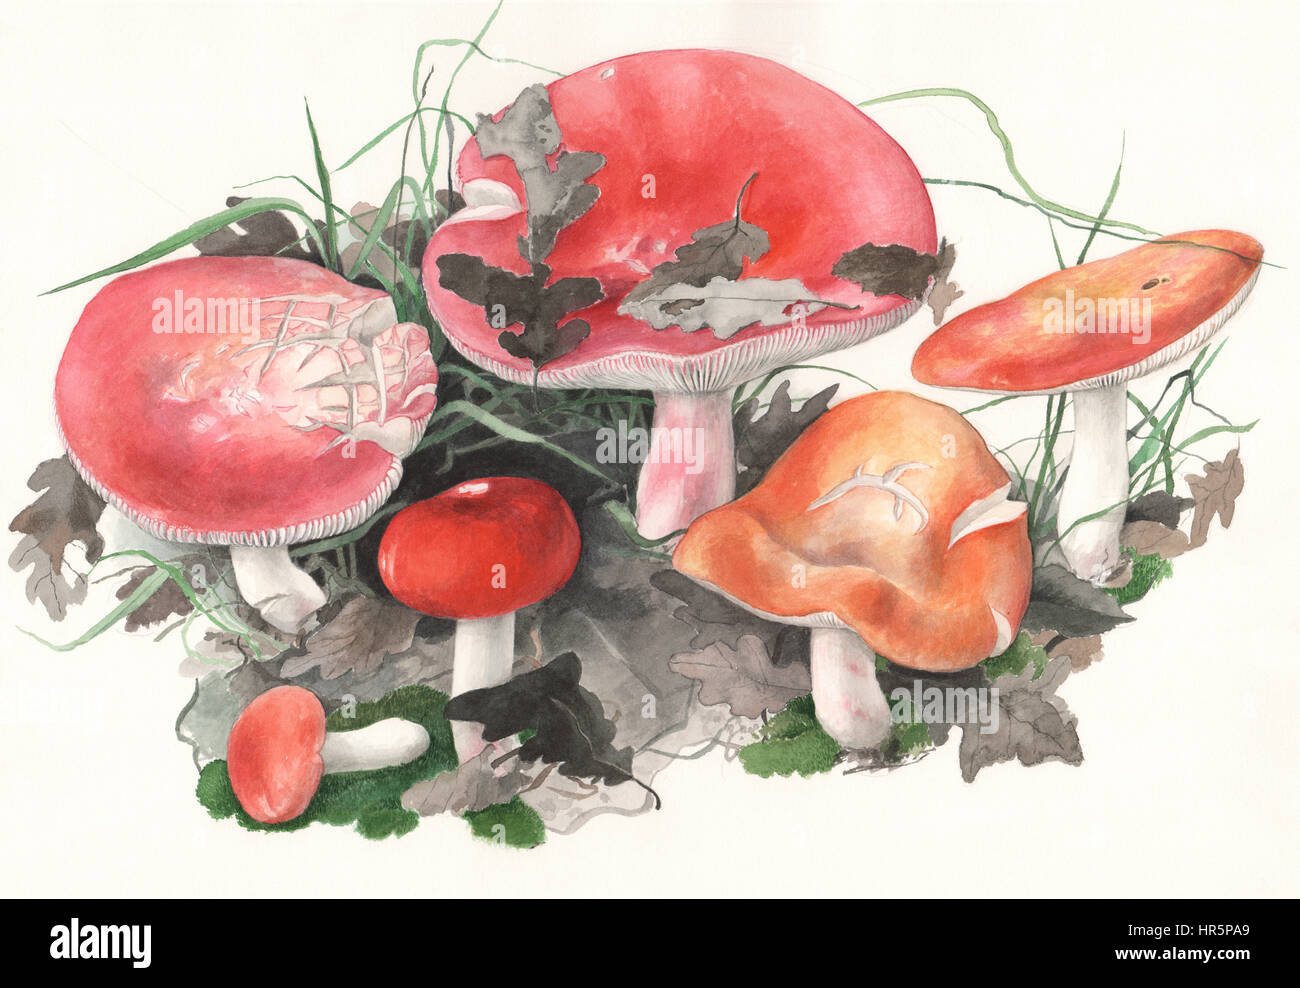 Mushrooms Russula pulchra. Hand painted watercolor illustration of wild mushrooms in natural context, against off-white background. Stock Photo